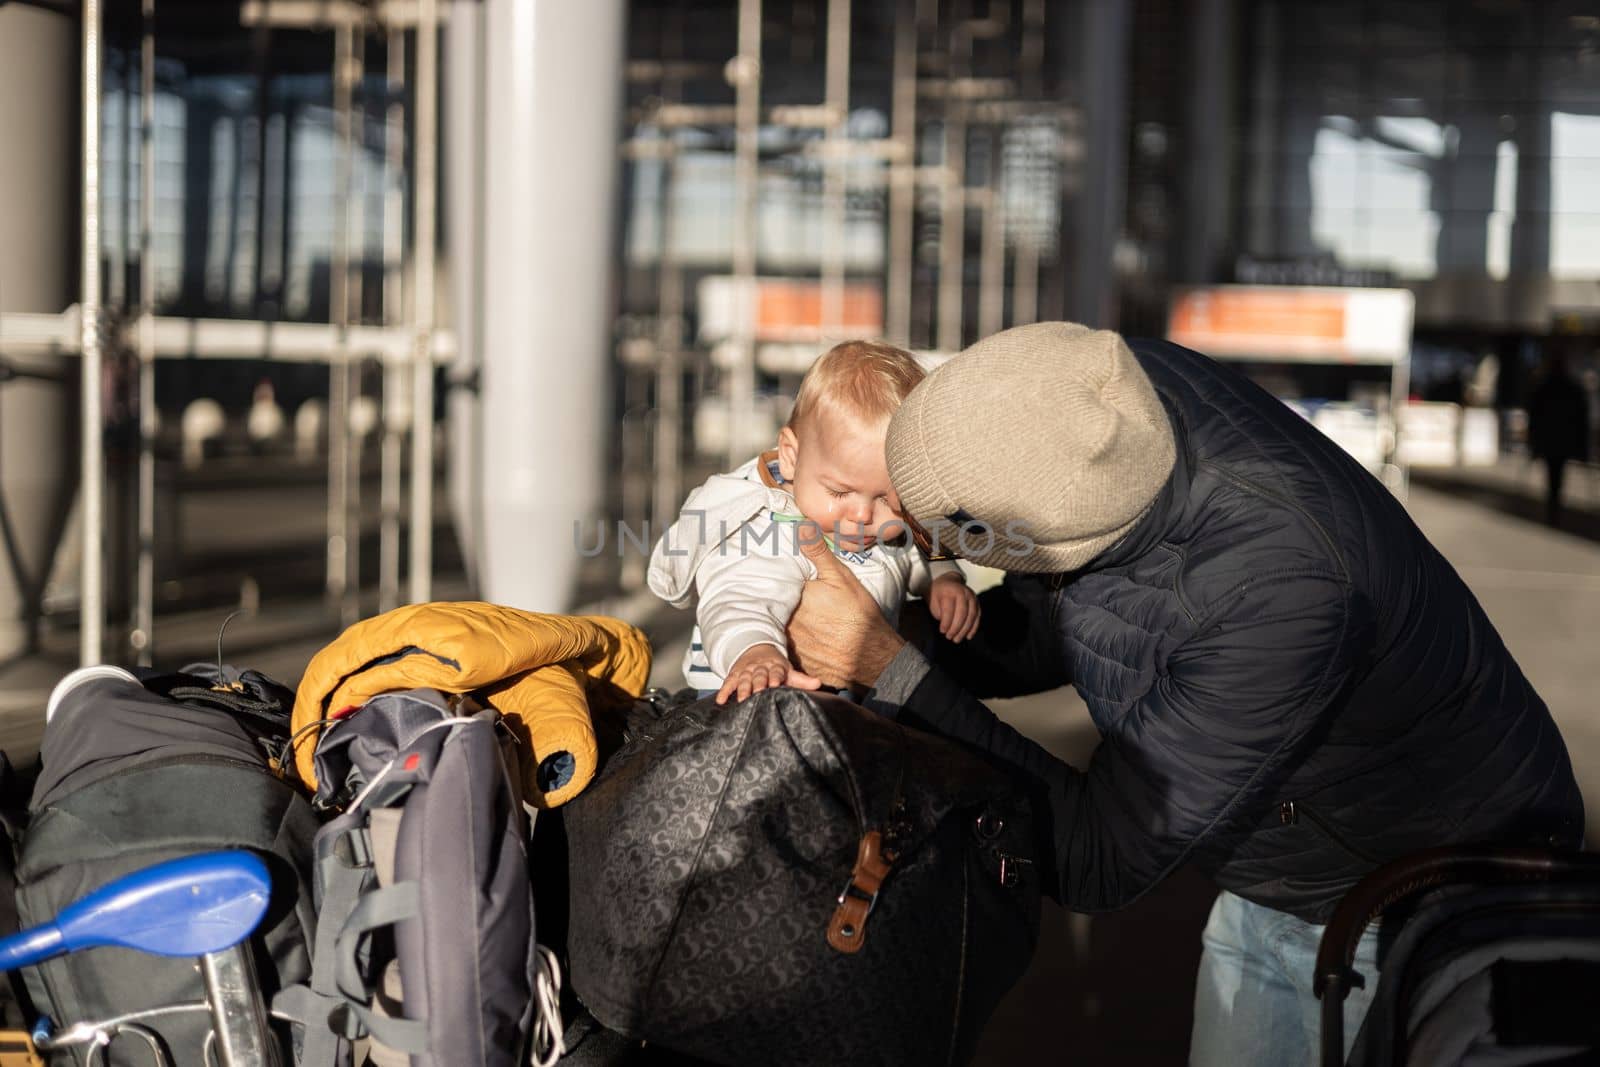 Fatherat comforting his crying infant baby boy child tired sitting on top of luggage cart in front of airport terminal station while traveling wih family